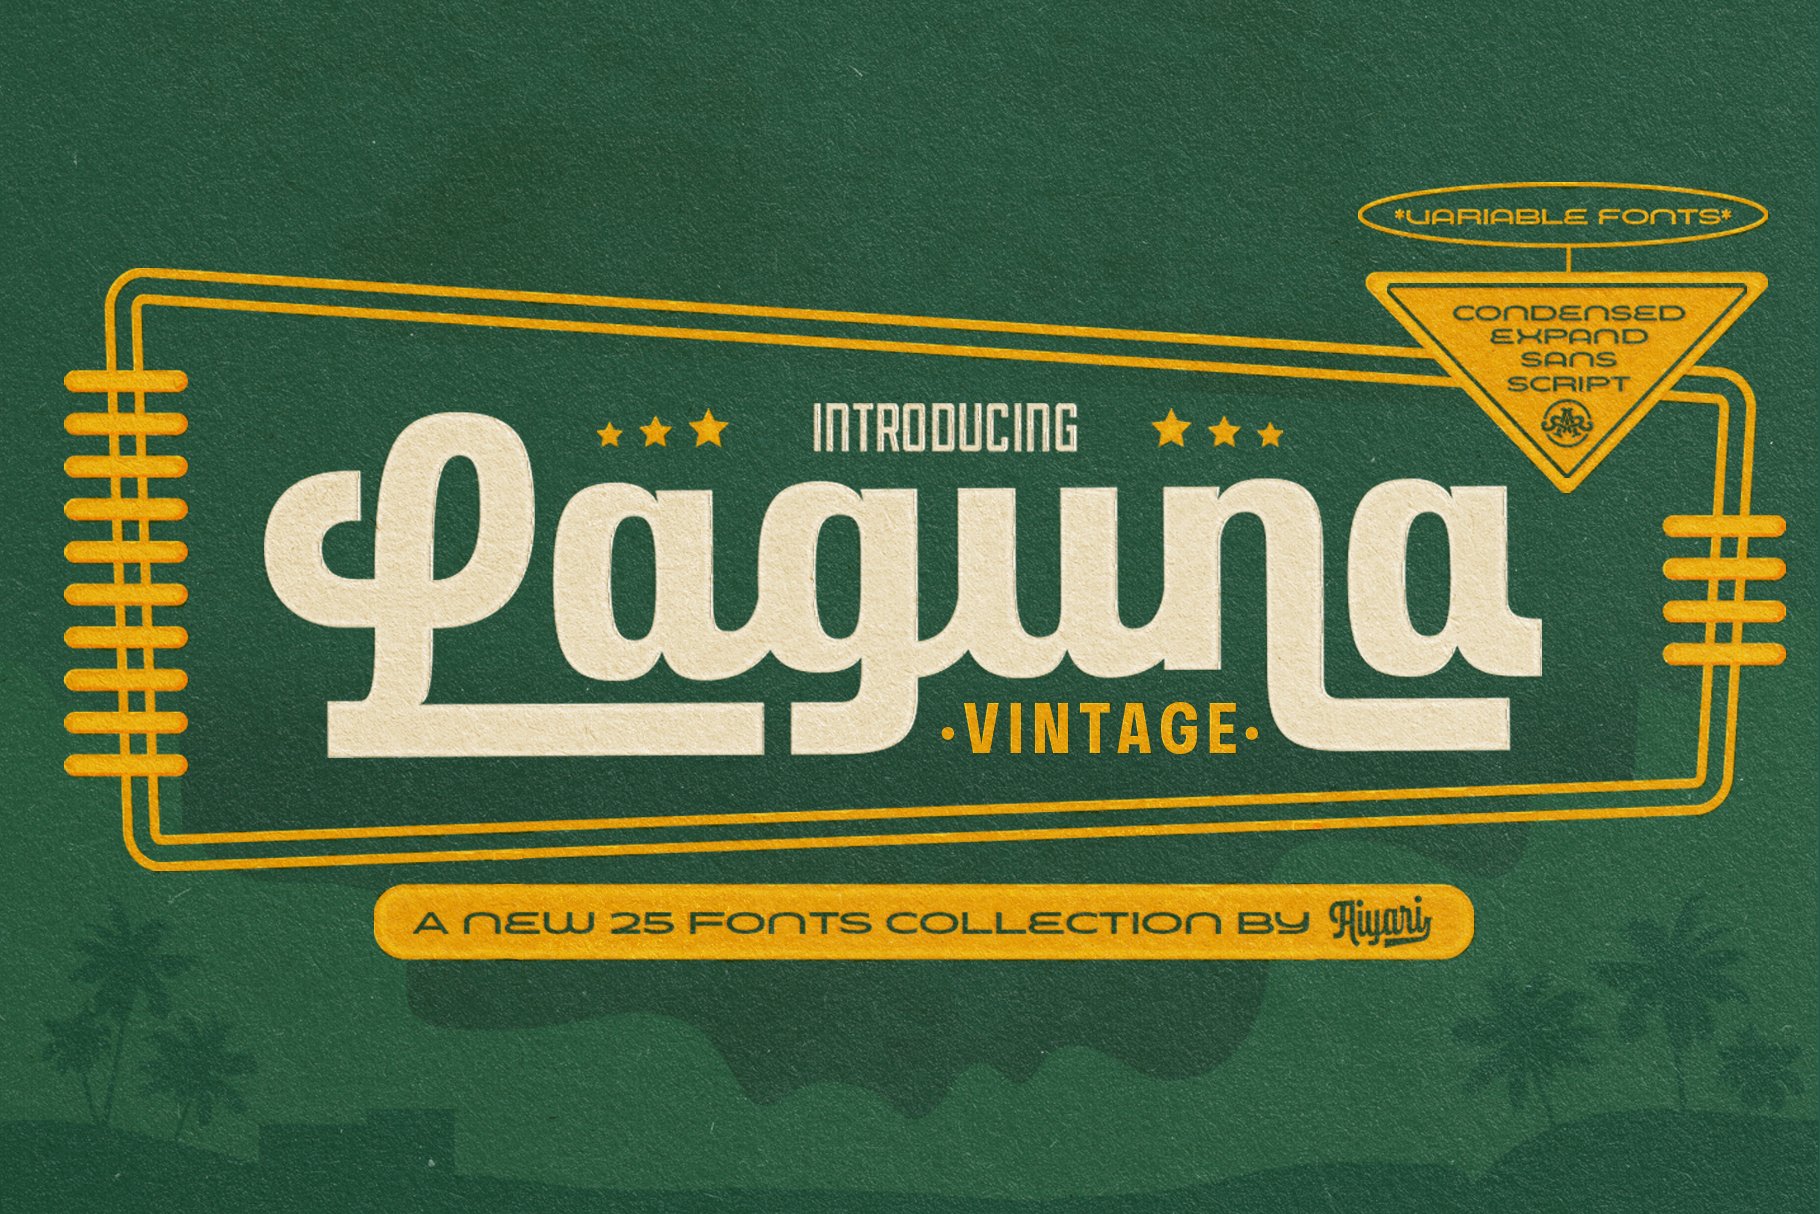 Laguna Vintage Collection cover image.